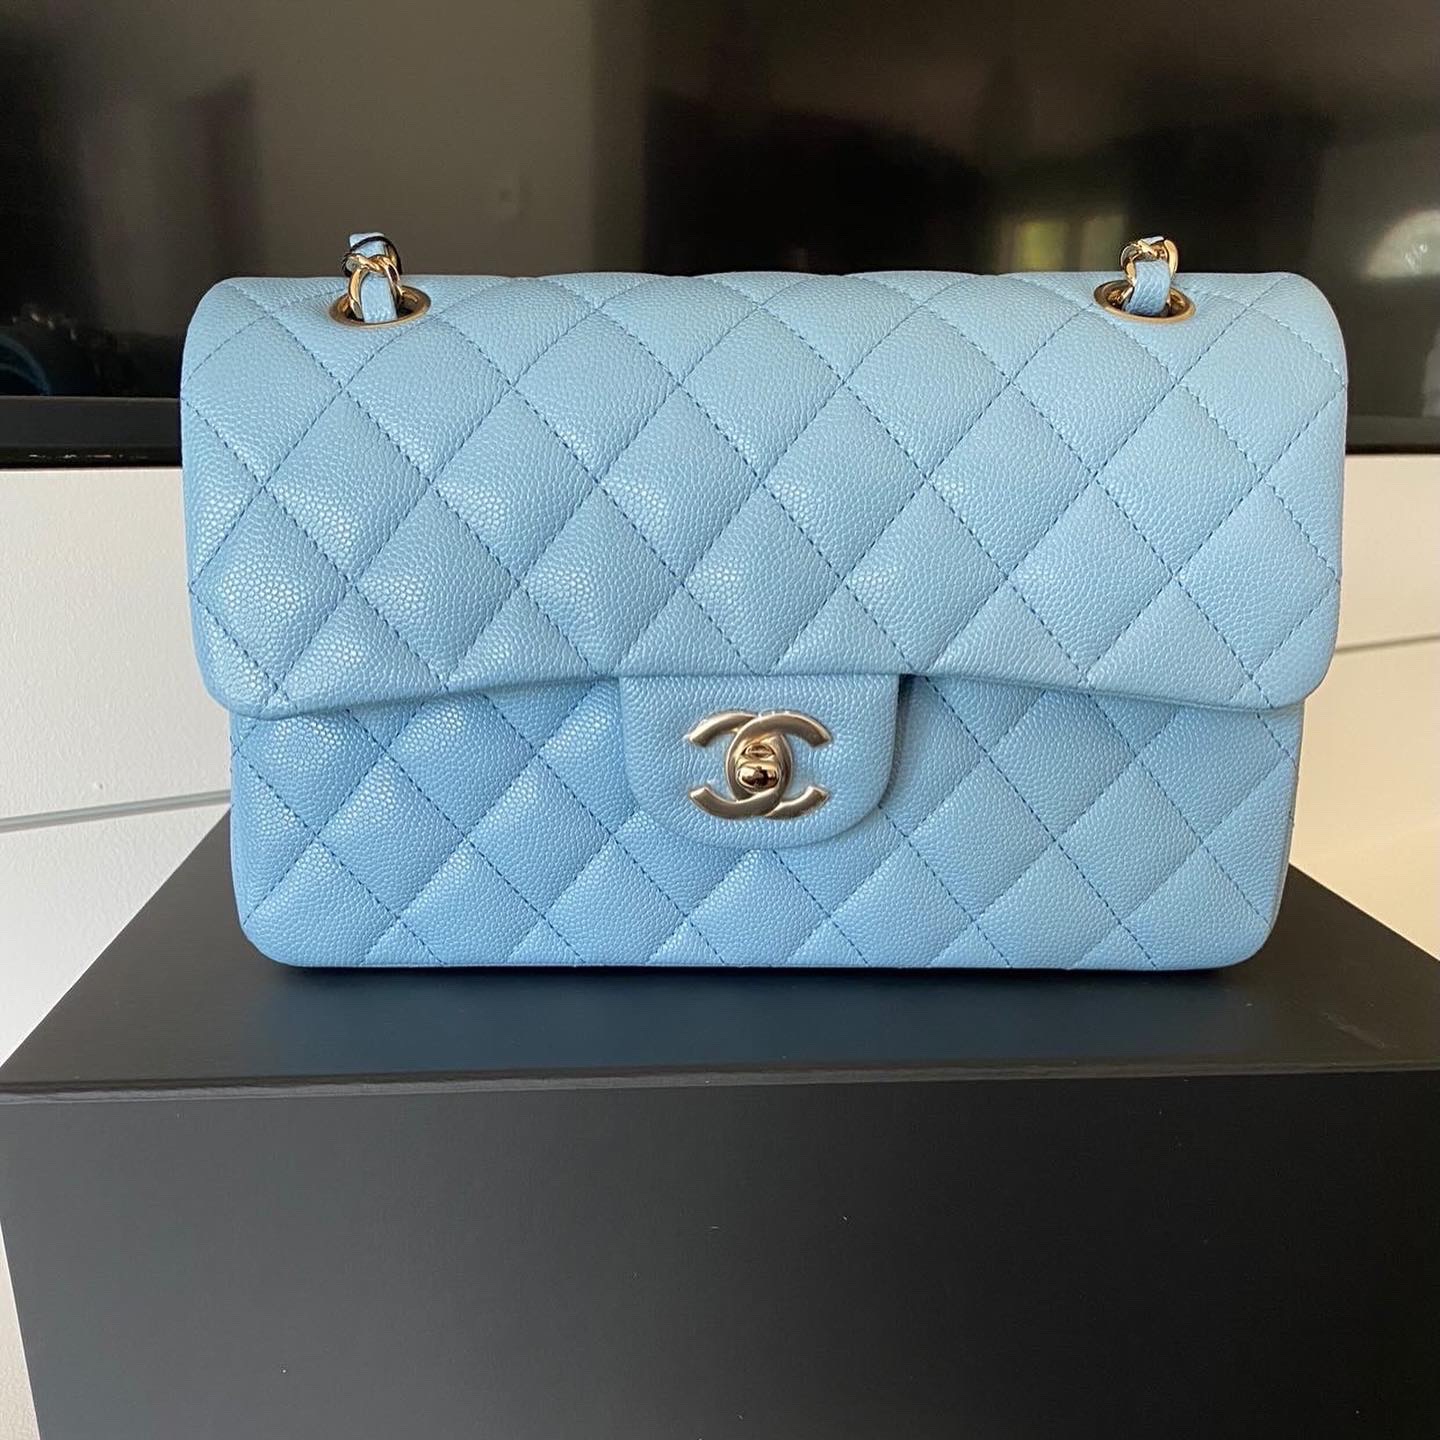 BN AUTHENTIC CHANEL CLASSIC SMALL DOUBLE FLAP IN LIGHT BLUE CAVIAR